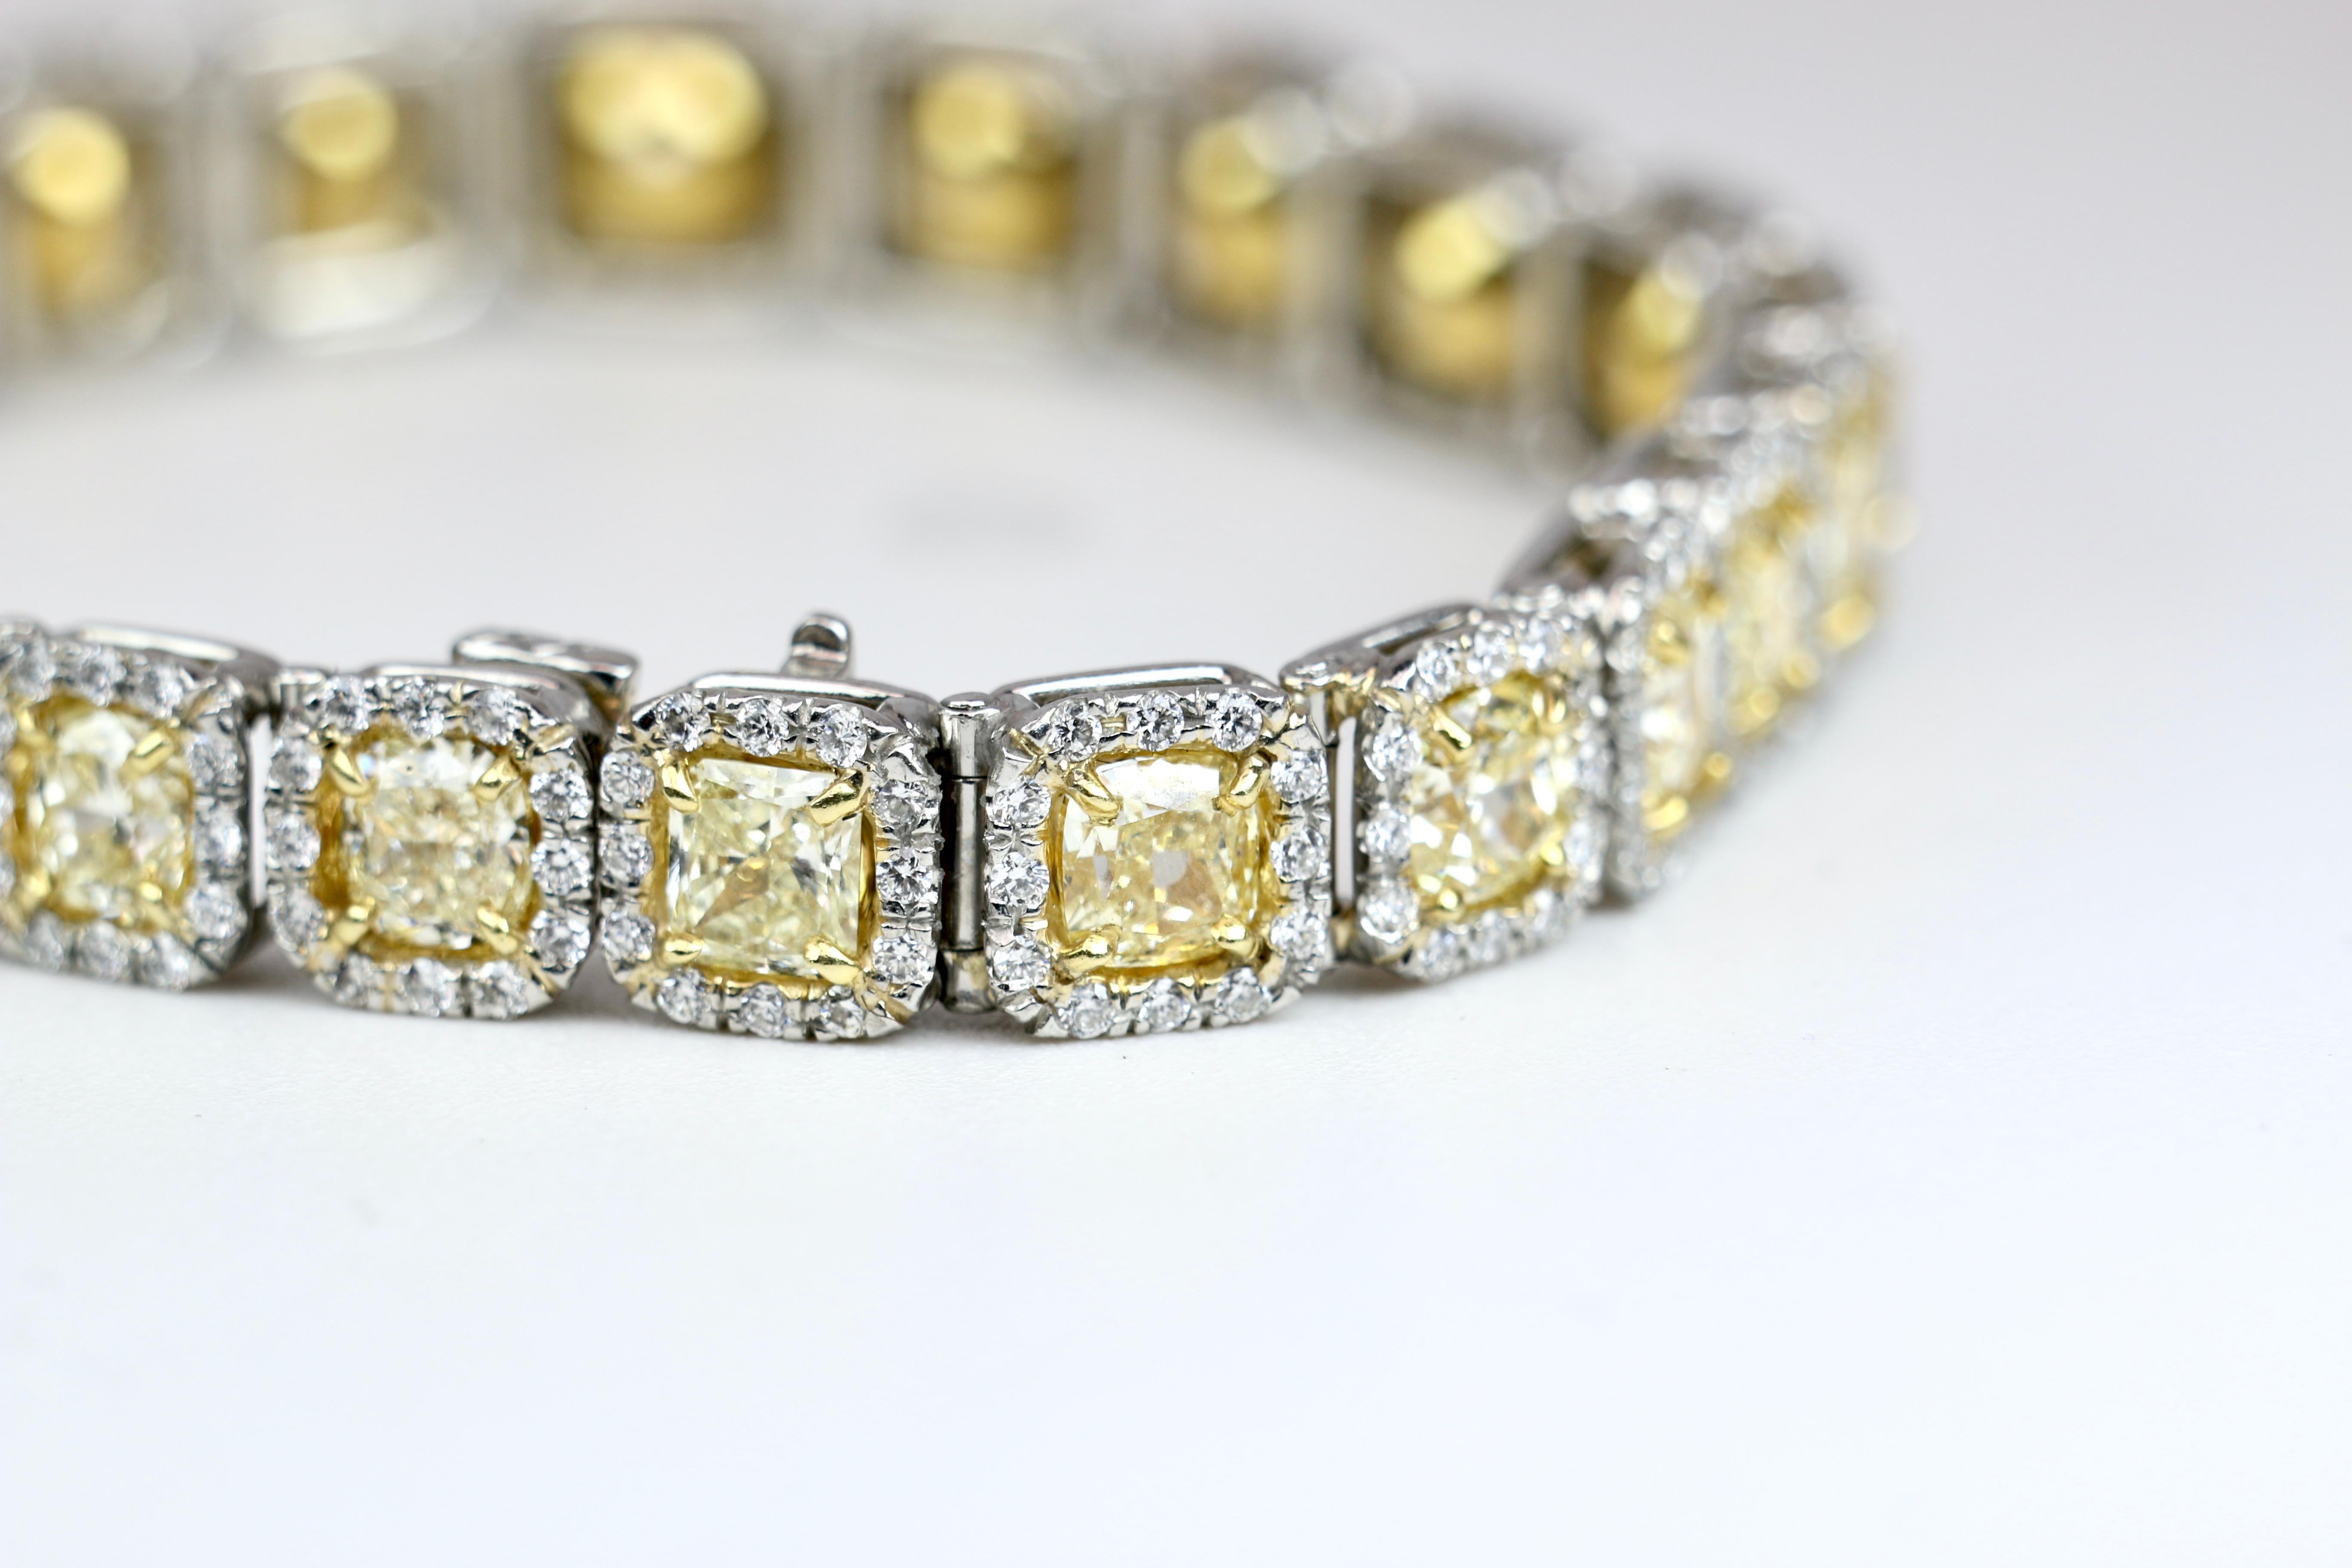 Platinum White Gold Diamond Bracelet with lively Yellow Diamonds.  This phenomenal bracelet is a classic lighting up your wrist and your night!
18K Yellow Diamond bracelet with 18.24 CTW Yellow Diamonds and 3.36 CTW White Diamonds 
Length is 7.5